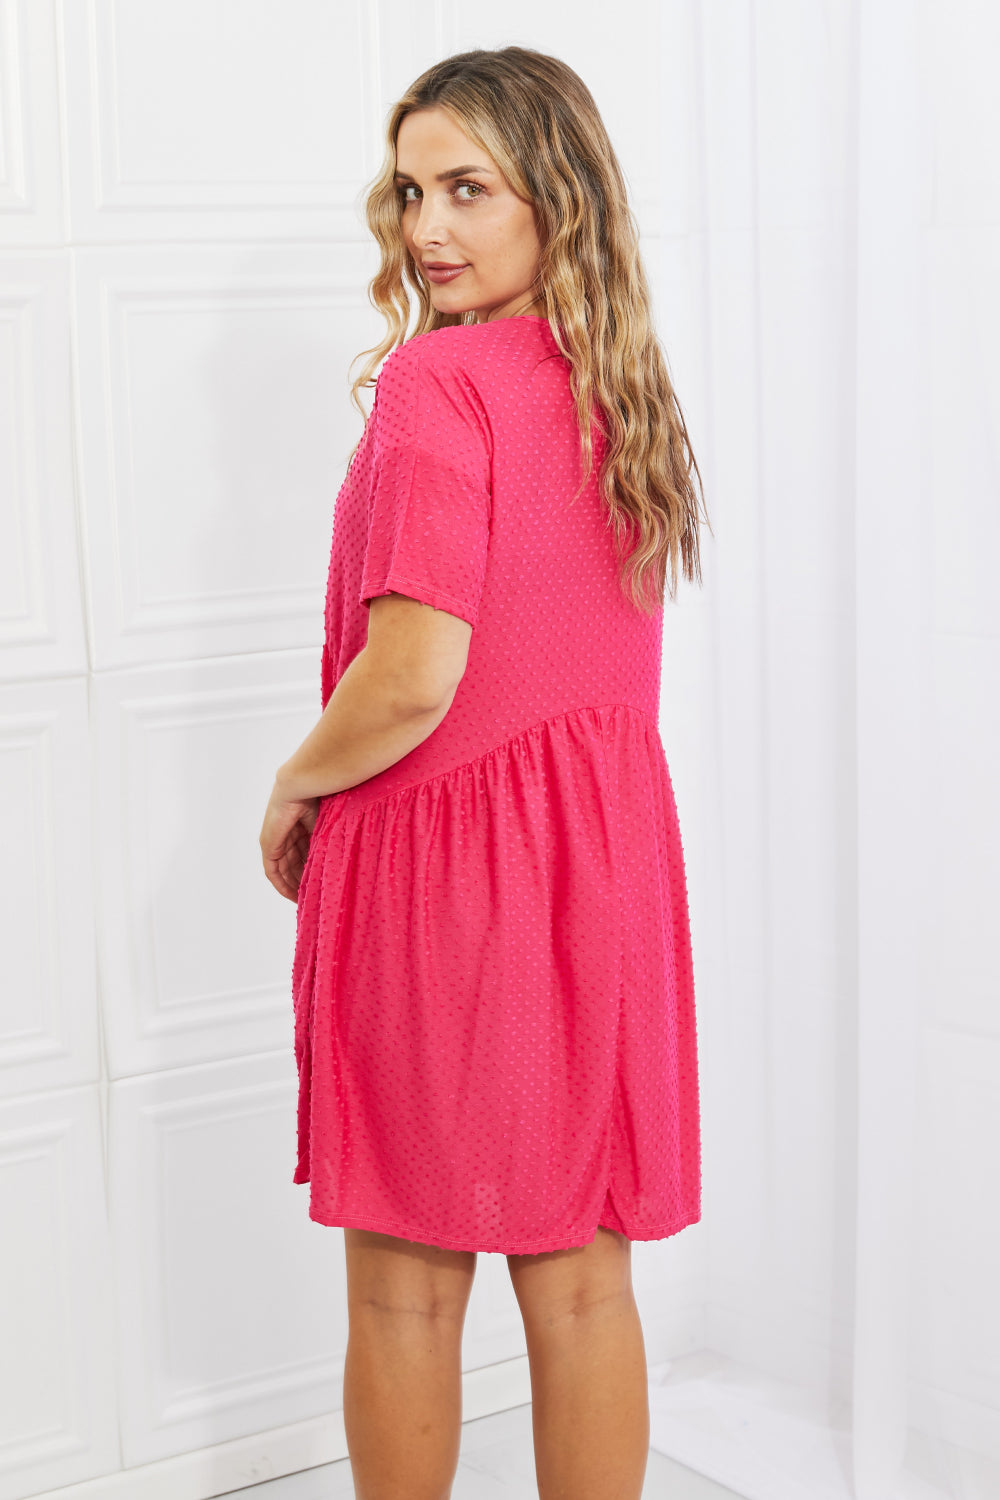 BOMBOM Another Day Swiss Dot Casual Dress in Fuchsia - Cheeky Chic Boutique